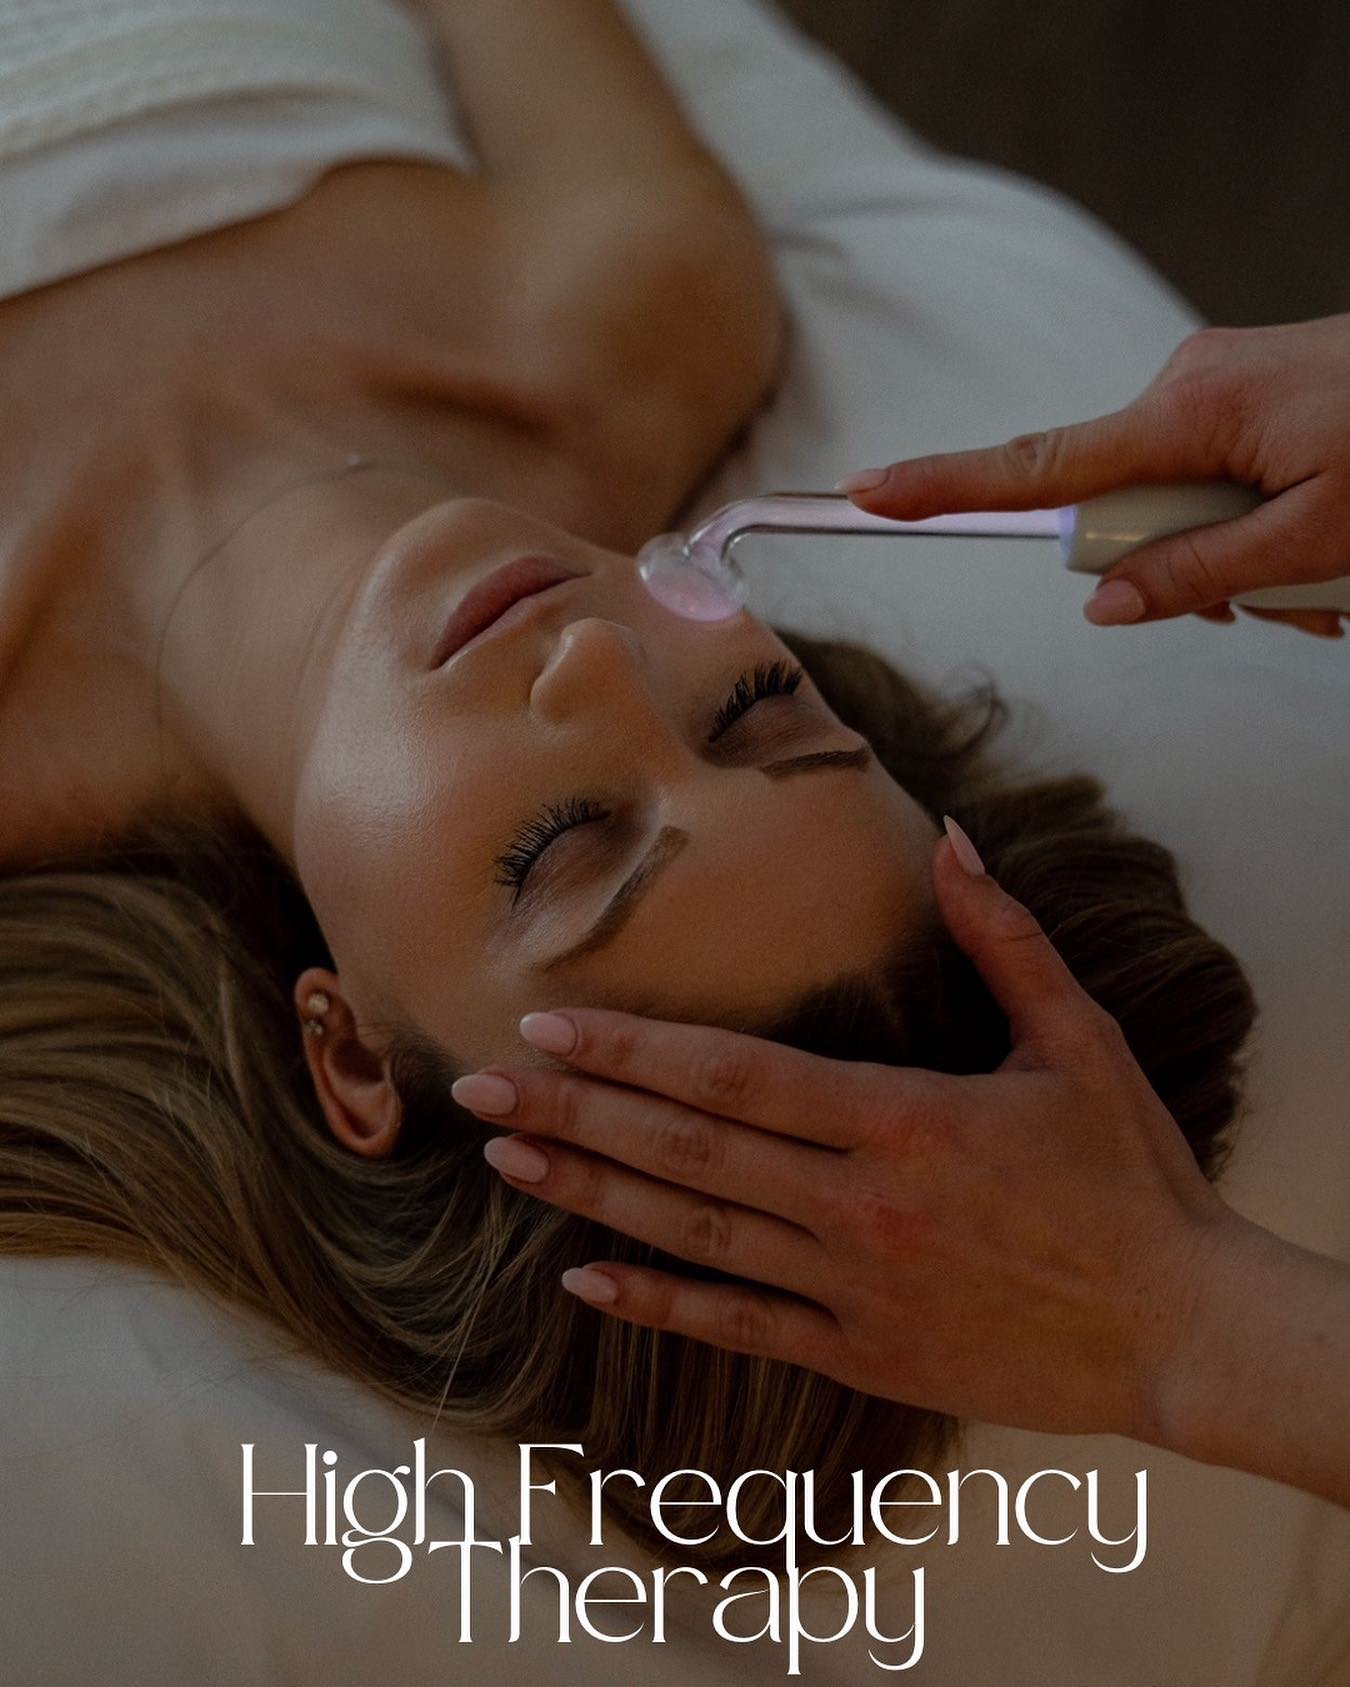 Let&rsquo;s talk High Frequency ⚡️

Included in every Aesthetic Acupuncture Facial

⚡️a painless gas electrode is glided over the skin for the ultimate glow⚡️

Acts as a &ldquo;natural&rdquo; thermal tissue warmer 🔥

BENEFITS:
⚡️stimulates collagen 